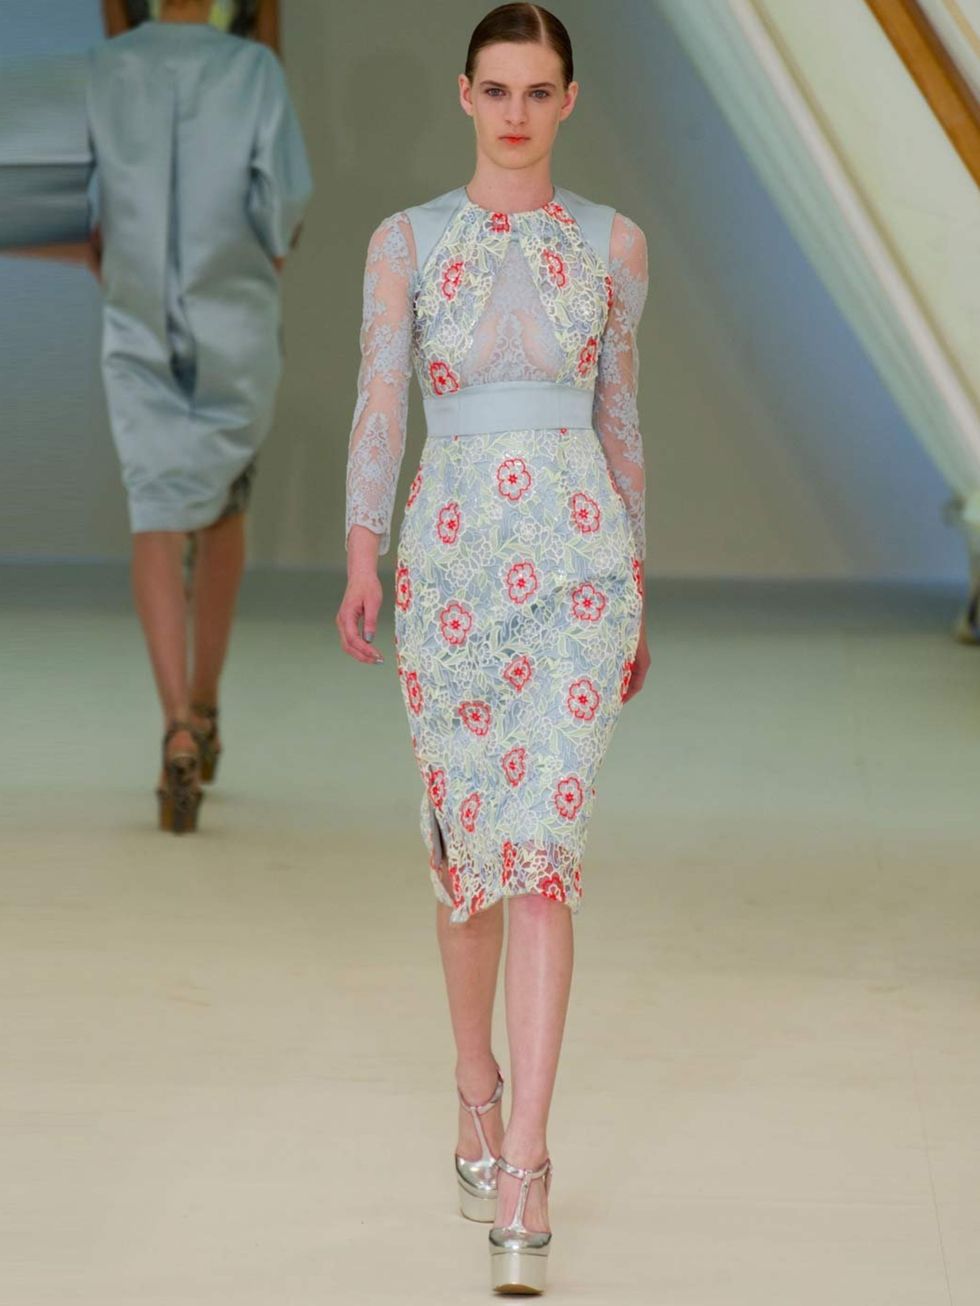 <p>'<a href="http://www.elleuk.com/catwalk/designer-a-z/erdem/spring-summer-2013">Erdem</a> is a wonderful match for Kate's feminine and understated style. This dress would be perfect for a summer garden party at Buckingham Palace.'</p>